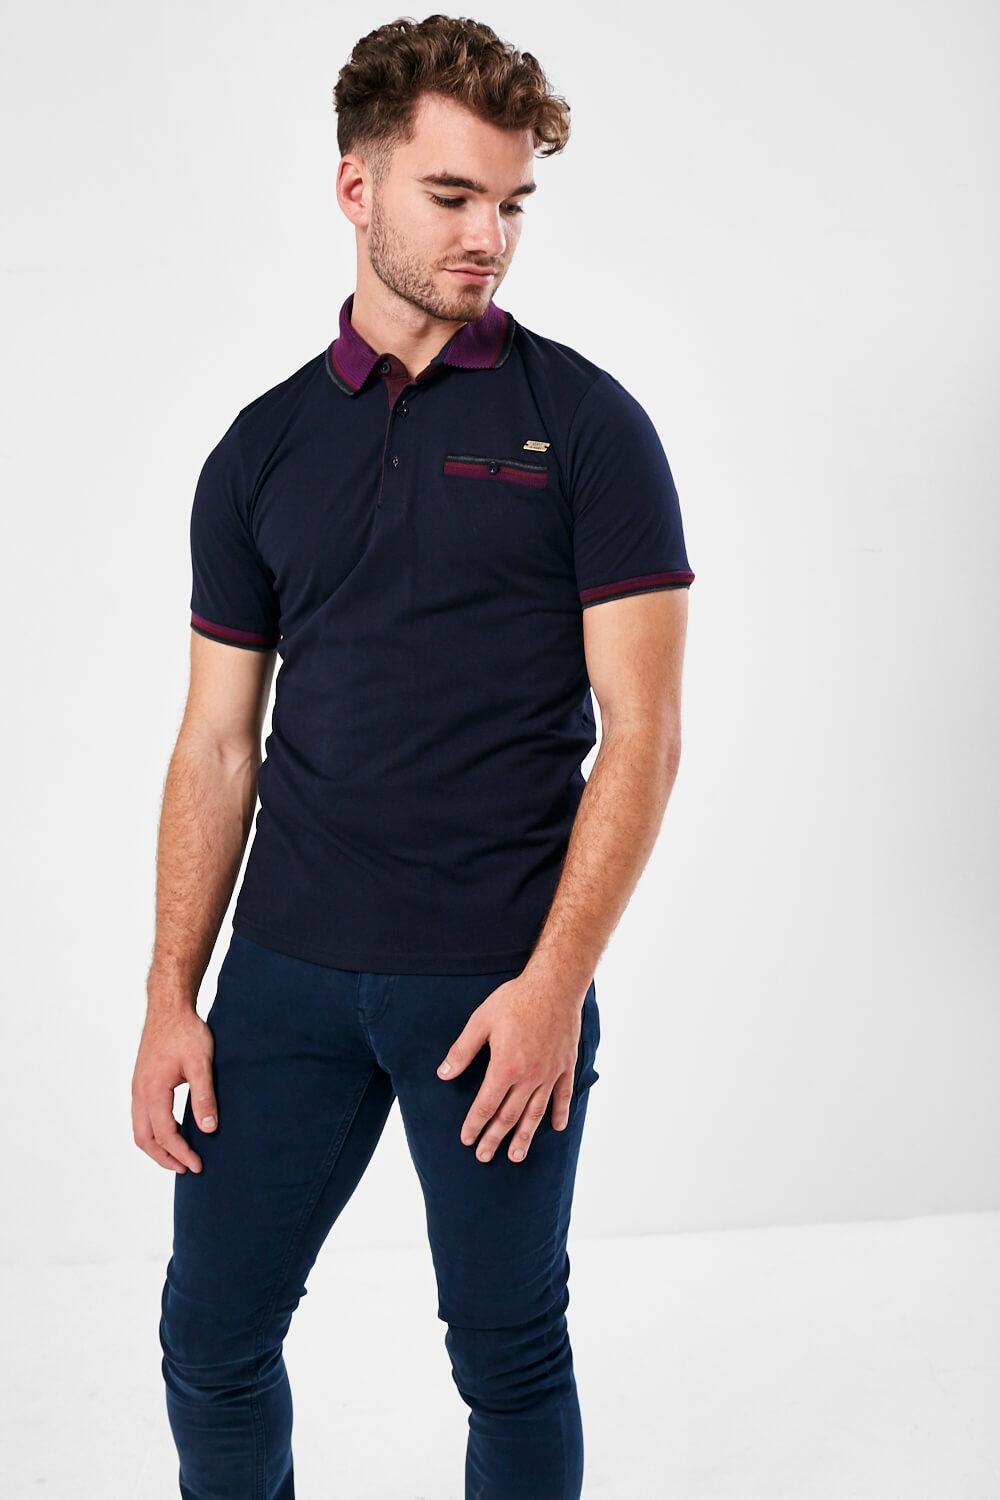 LLOYD NAVY POLO | Gasoline.ie Irish owned online clothing store for men ...